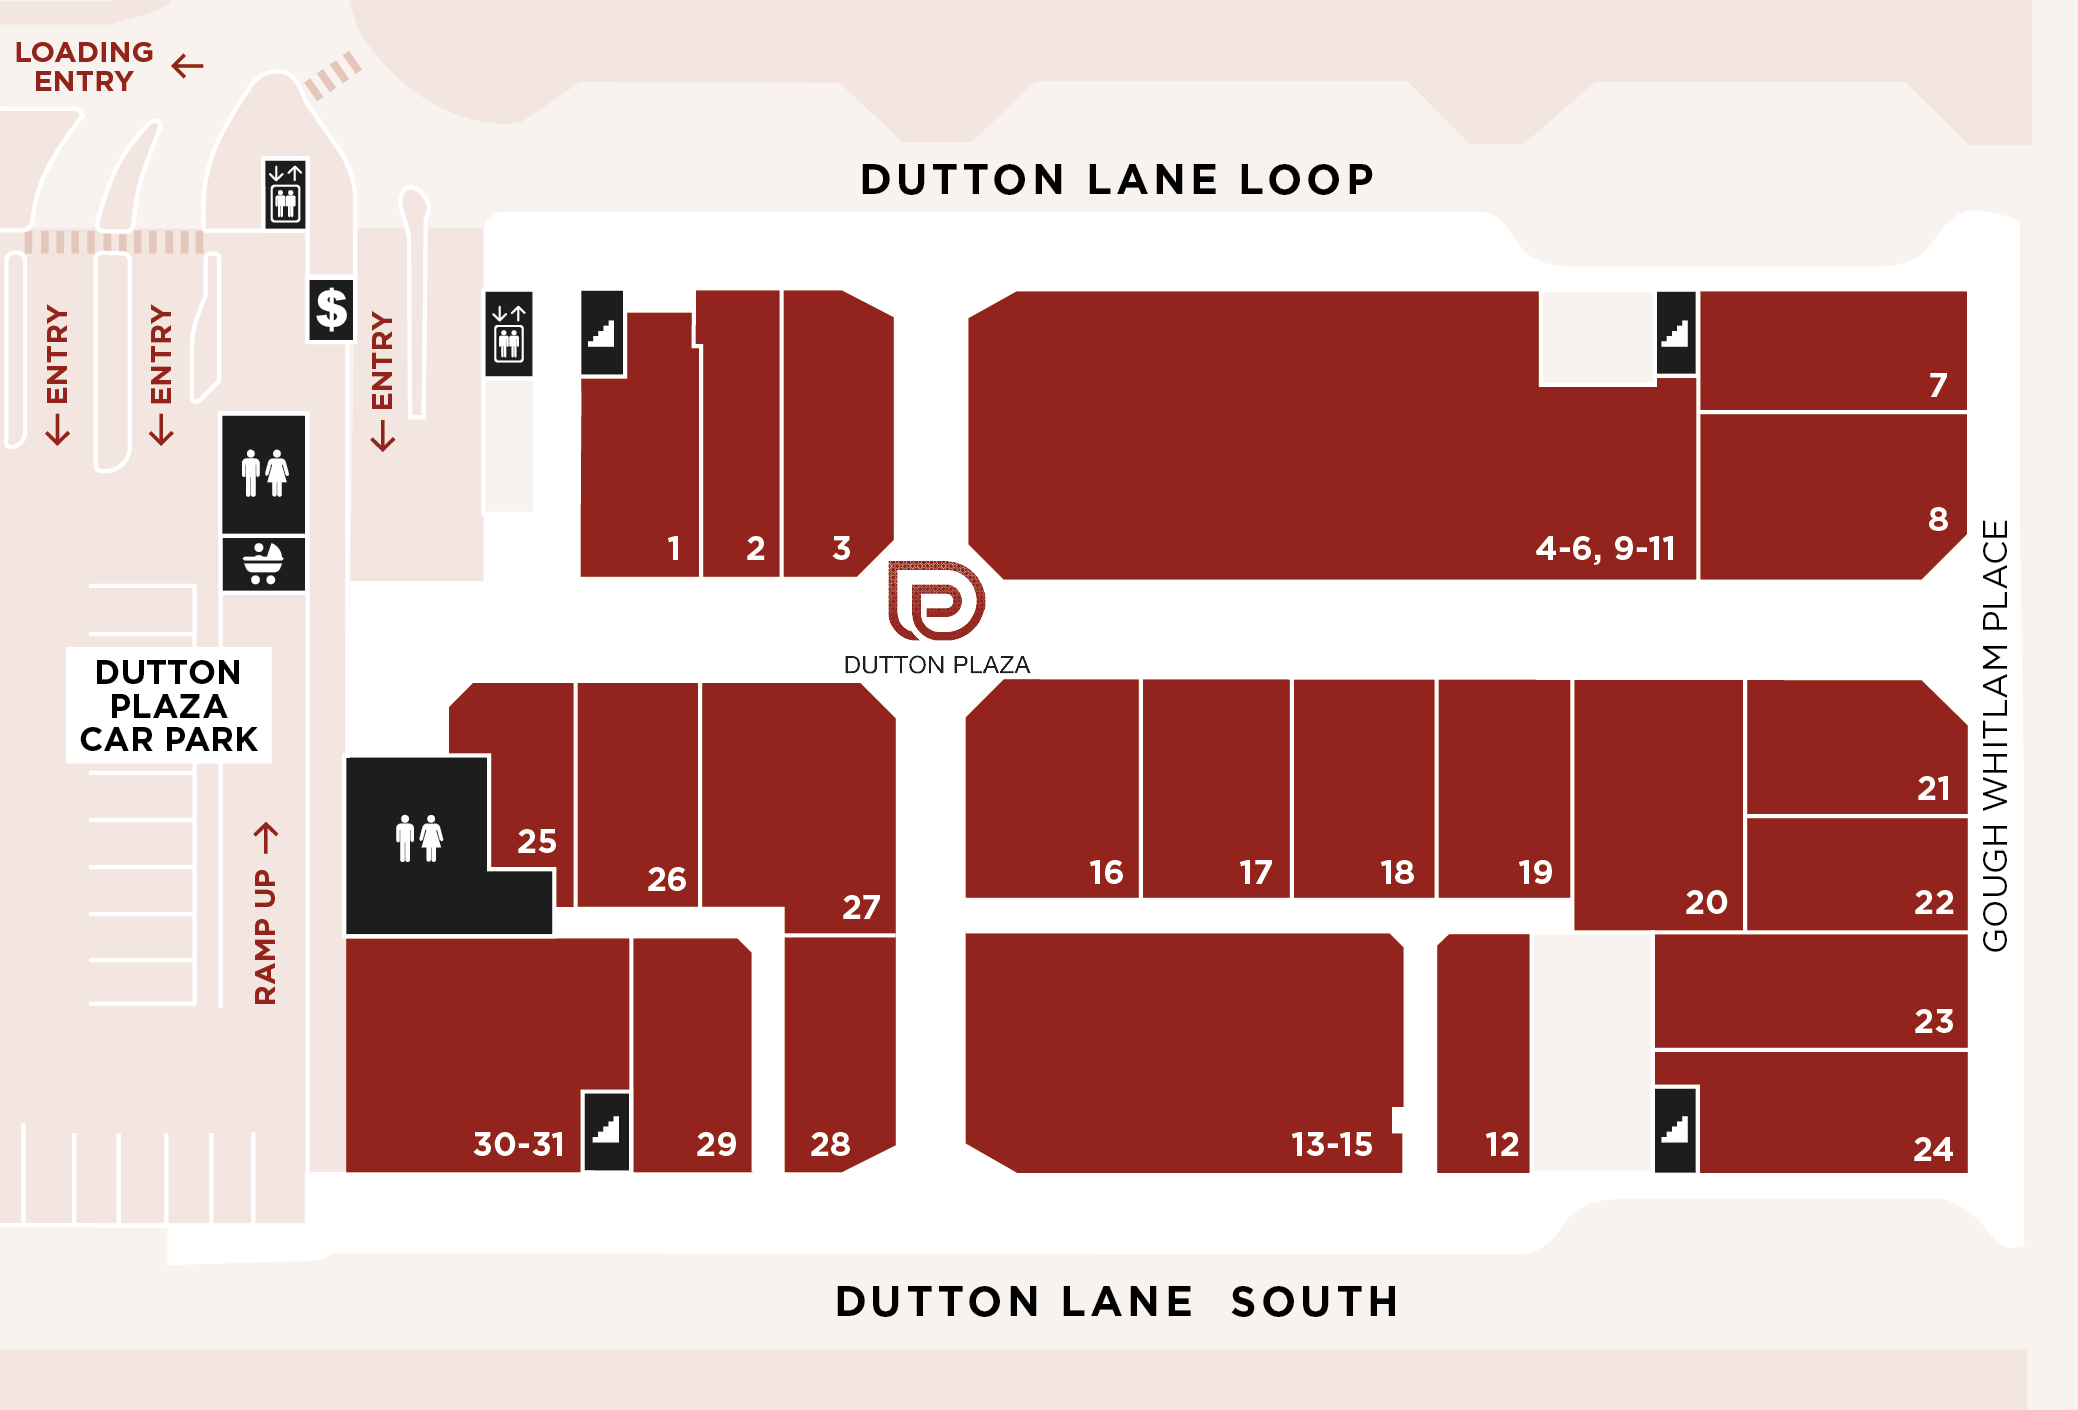 Map of Dutton Plaza ground floor showing locations of each shop. List of shops described under the heading List of Shops on Ground Level.